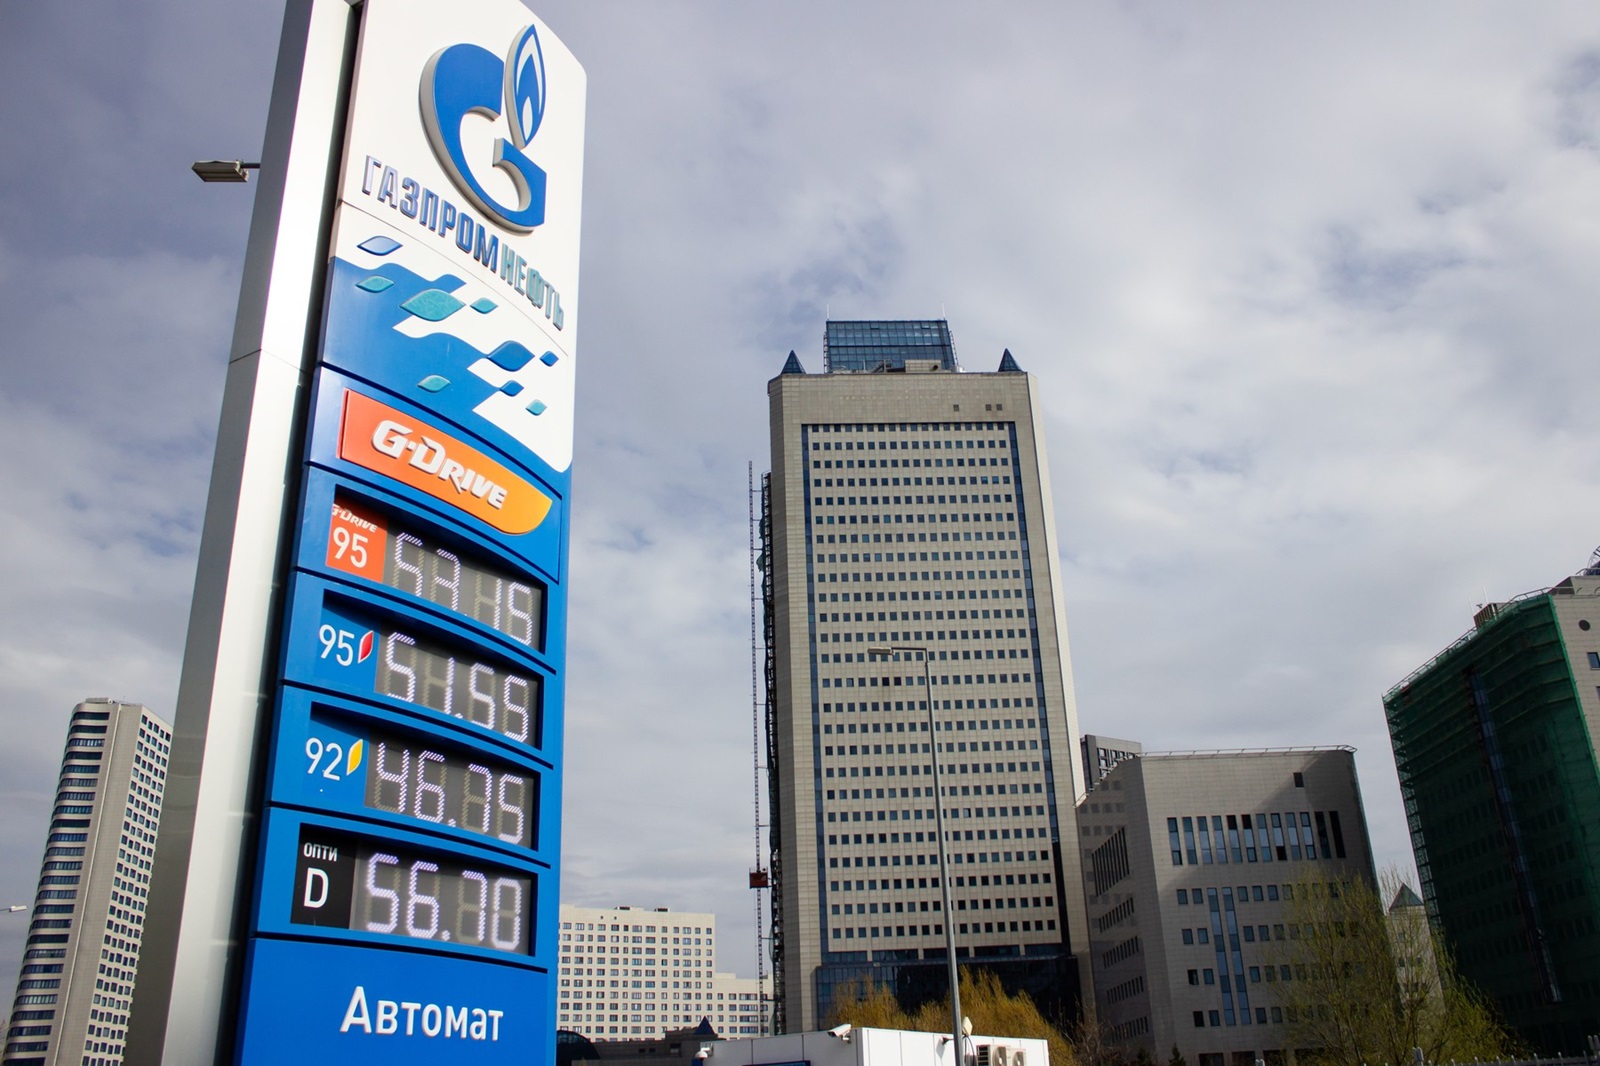 April 17, 2023, Moscow, Russia: A Gazprom Neft filling station is seen next to the Gazprom Headquarters building in Moscow. A subsidiary of Gazprom, Gazprom Neft is the third largest oil producer in Russia. According to Russian media reports, employees of Russian state oil and gas-producing corporations were informally prohibited from traveling abroad in December 2022. Recent reports indicate that rules on foreign travel for the above-mentioned employees were recently laxed to include 14 friendly countries including China, Turkey, India, Qatar, Serbia, Morocco, Sri Lanka, United Arab Emirates, and the CIS states.,Image: 770101350, License: Rights-managed, Restrictions: , Model Release: no, Credit line: Vlad Karkov / Zuma Press / Profimedia